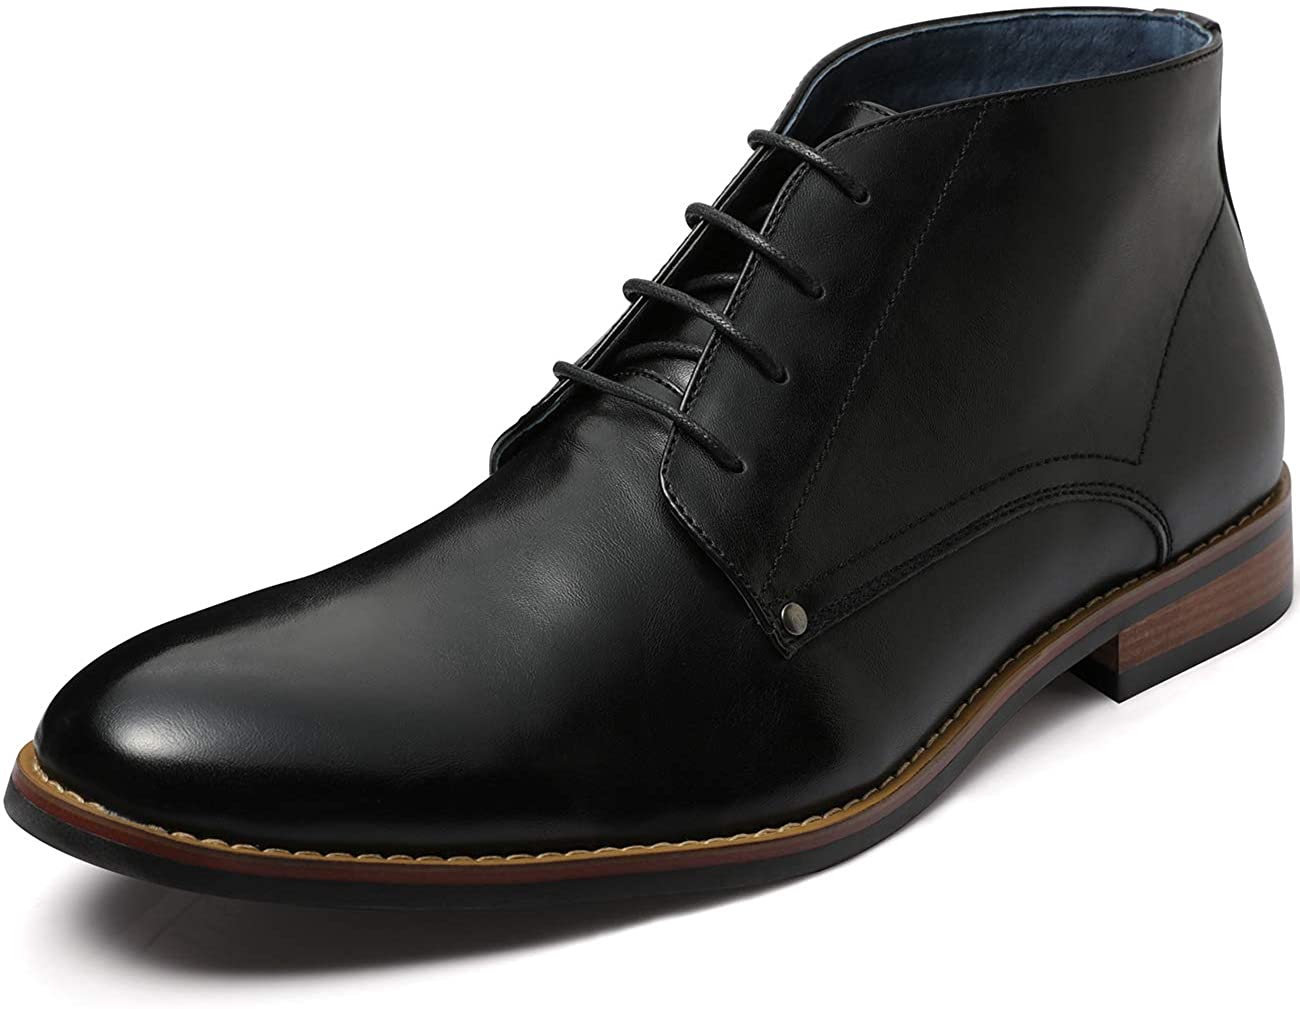 ZRIANG Mens Dress Ankle Motorcycle Leather Lined Derby Oxford Boots